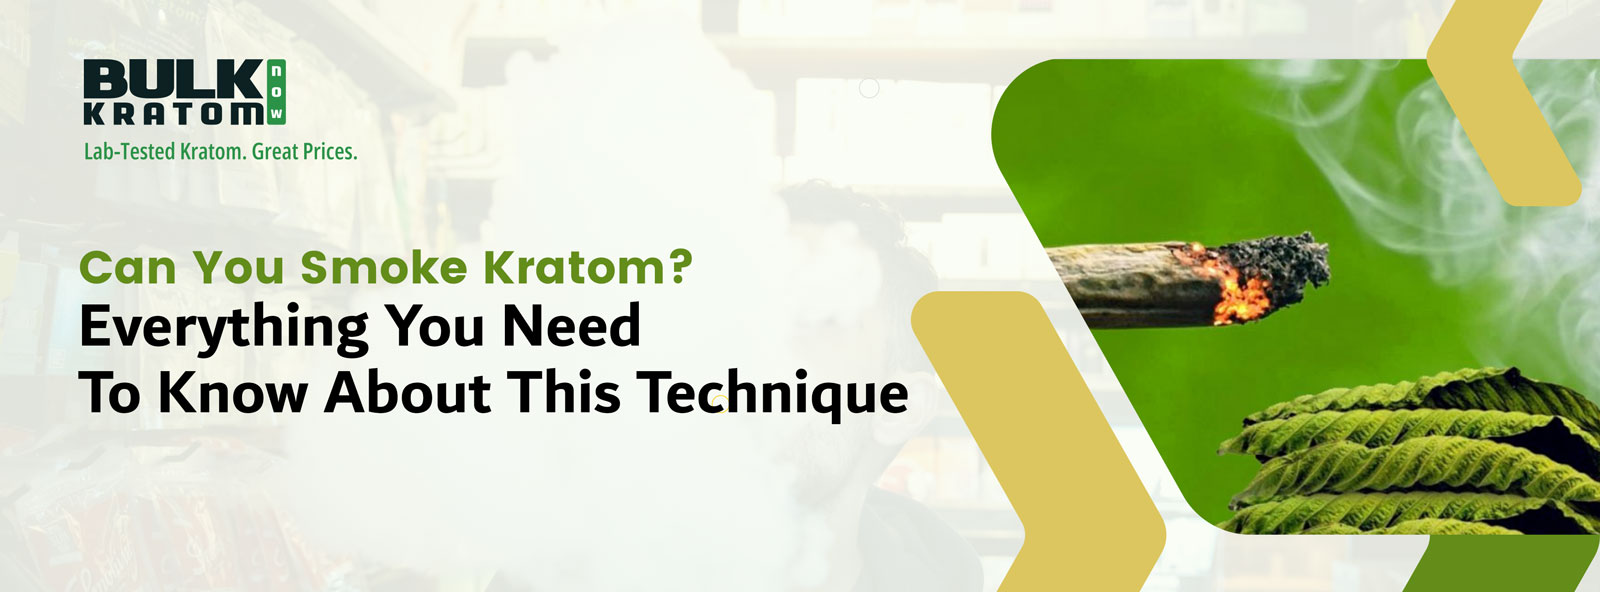 Can You Smoke Kratom? Everything You Need To Know About This Technique